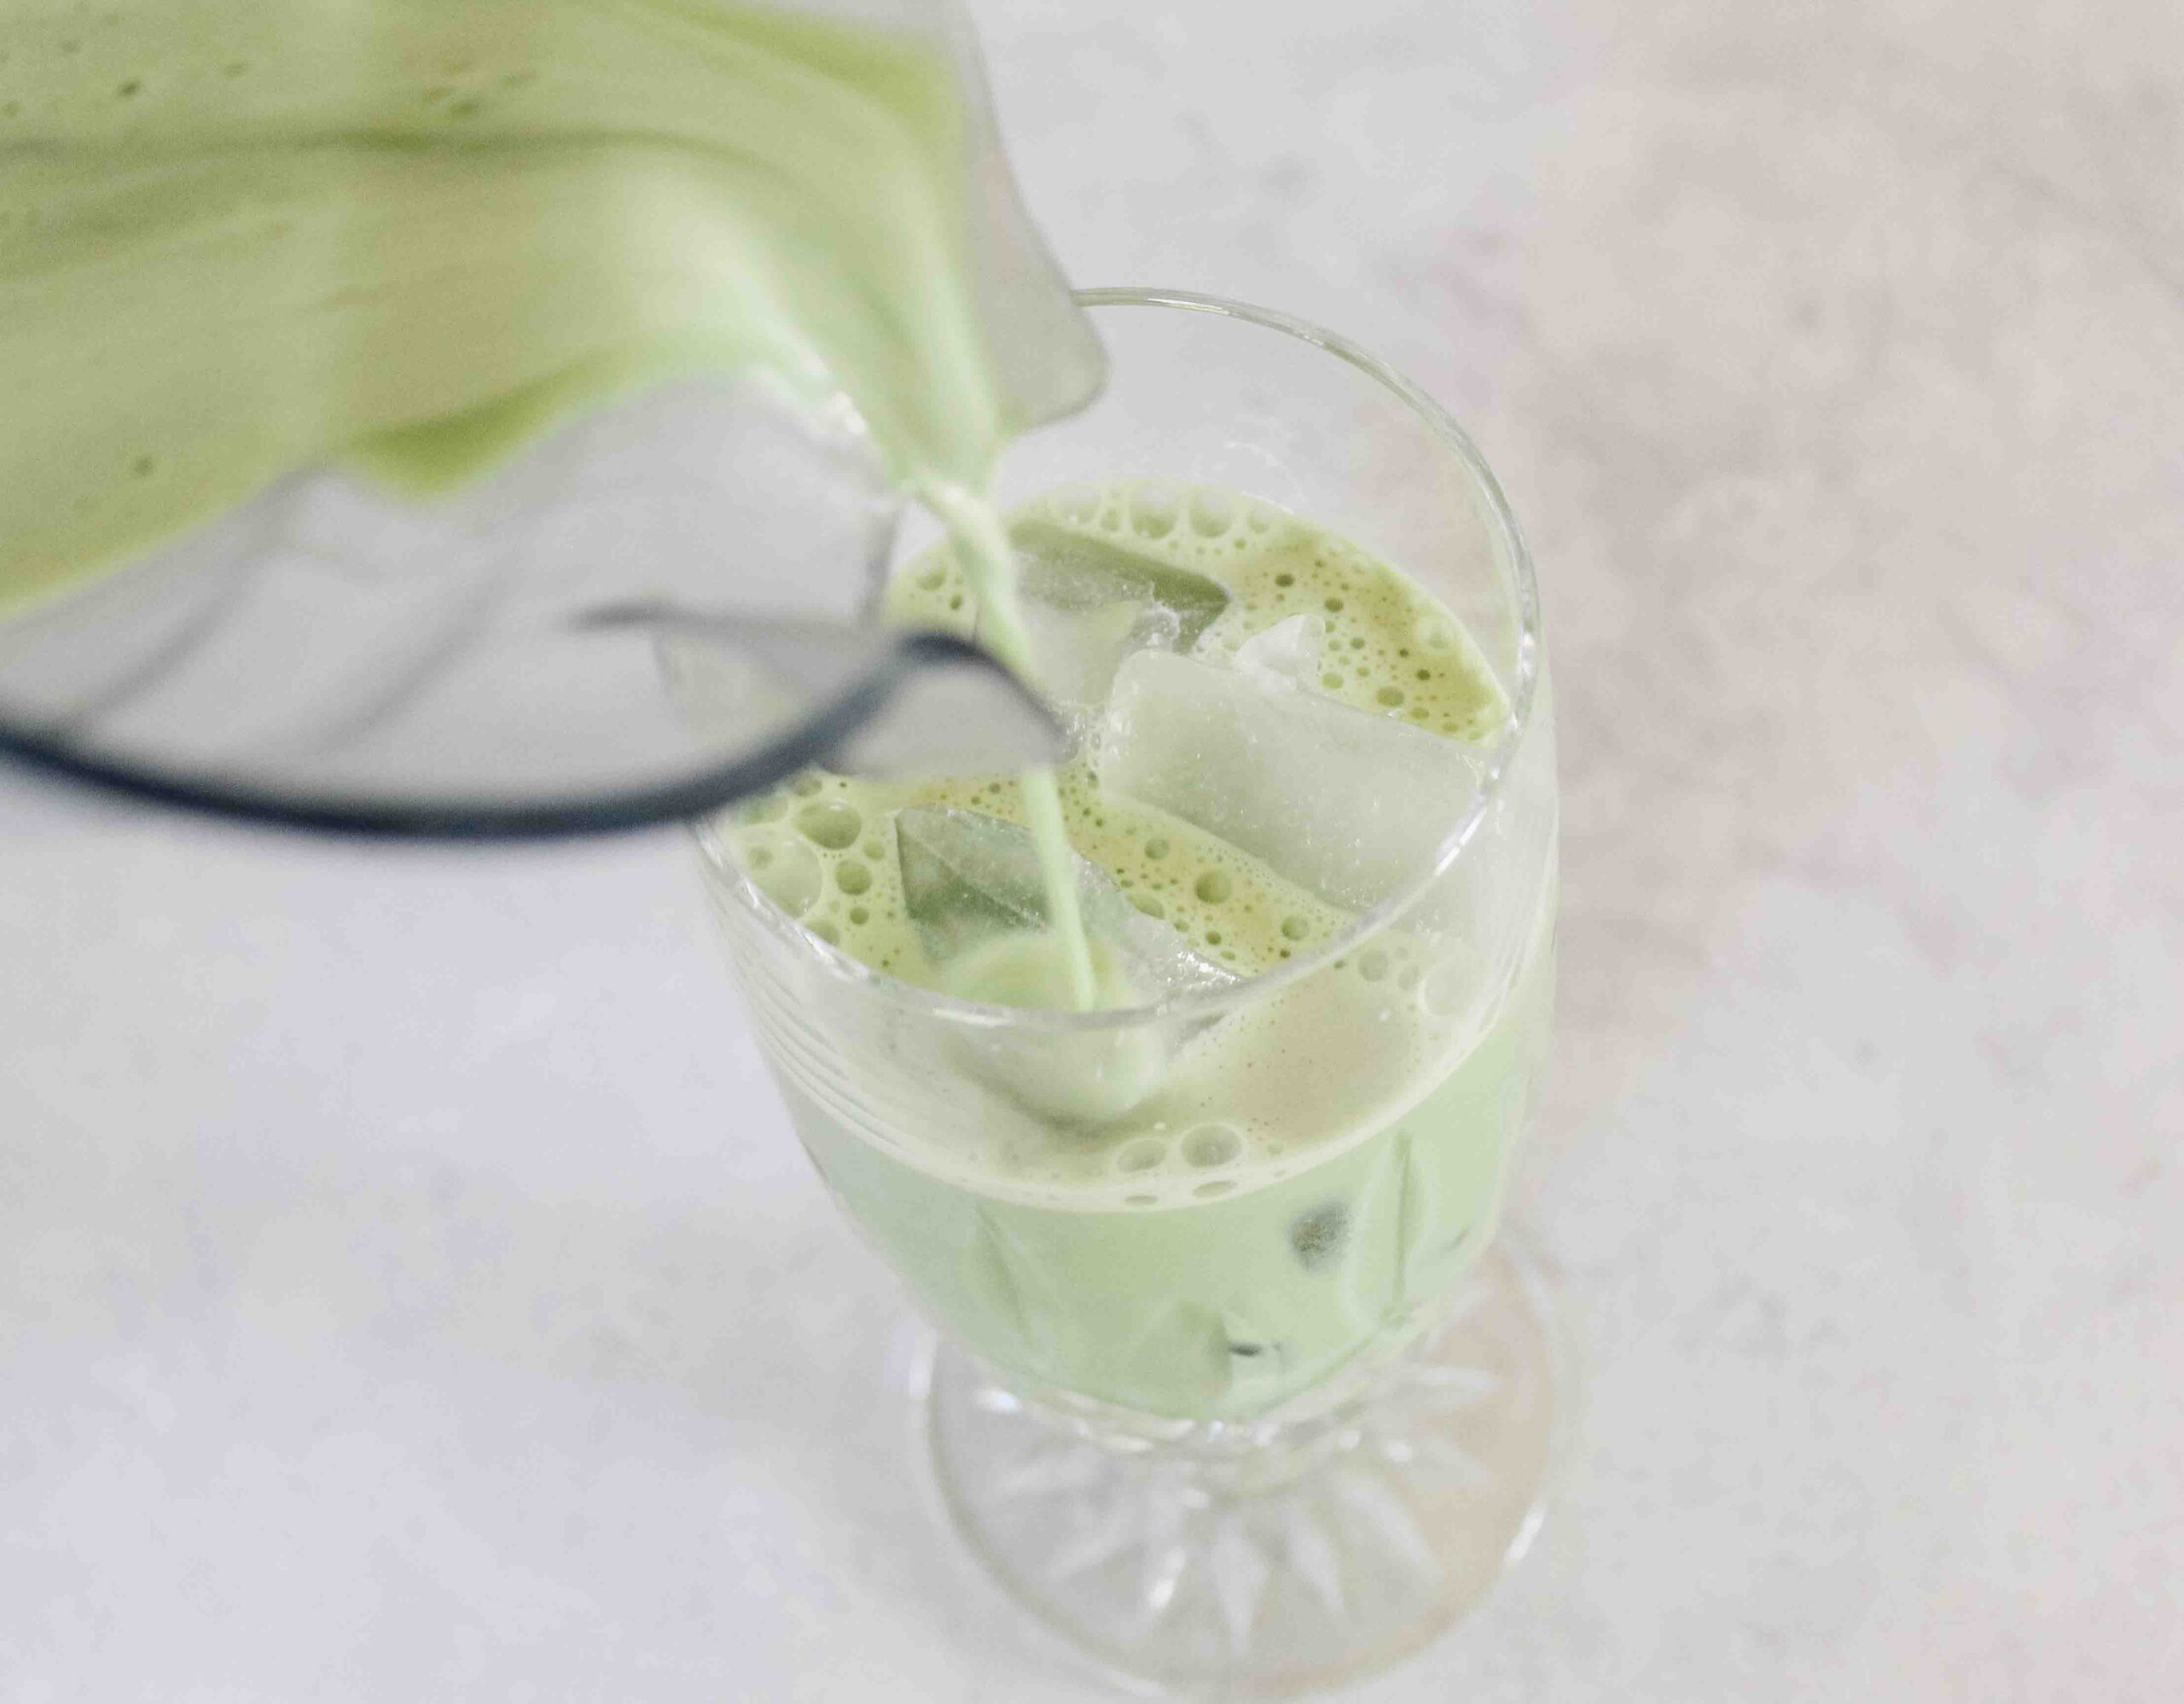 Iced matcha latte being poured from blender into a cup of iced